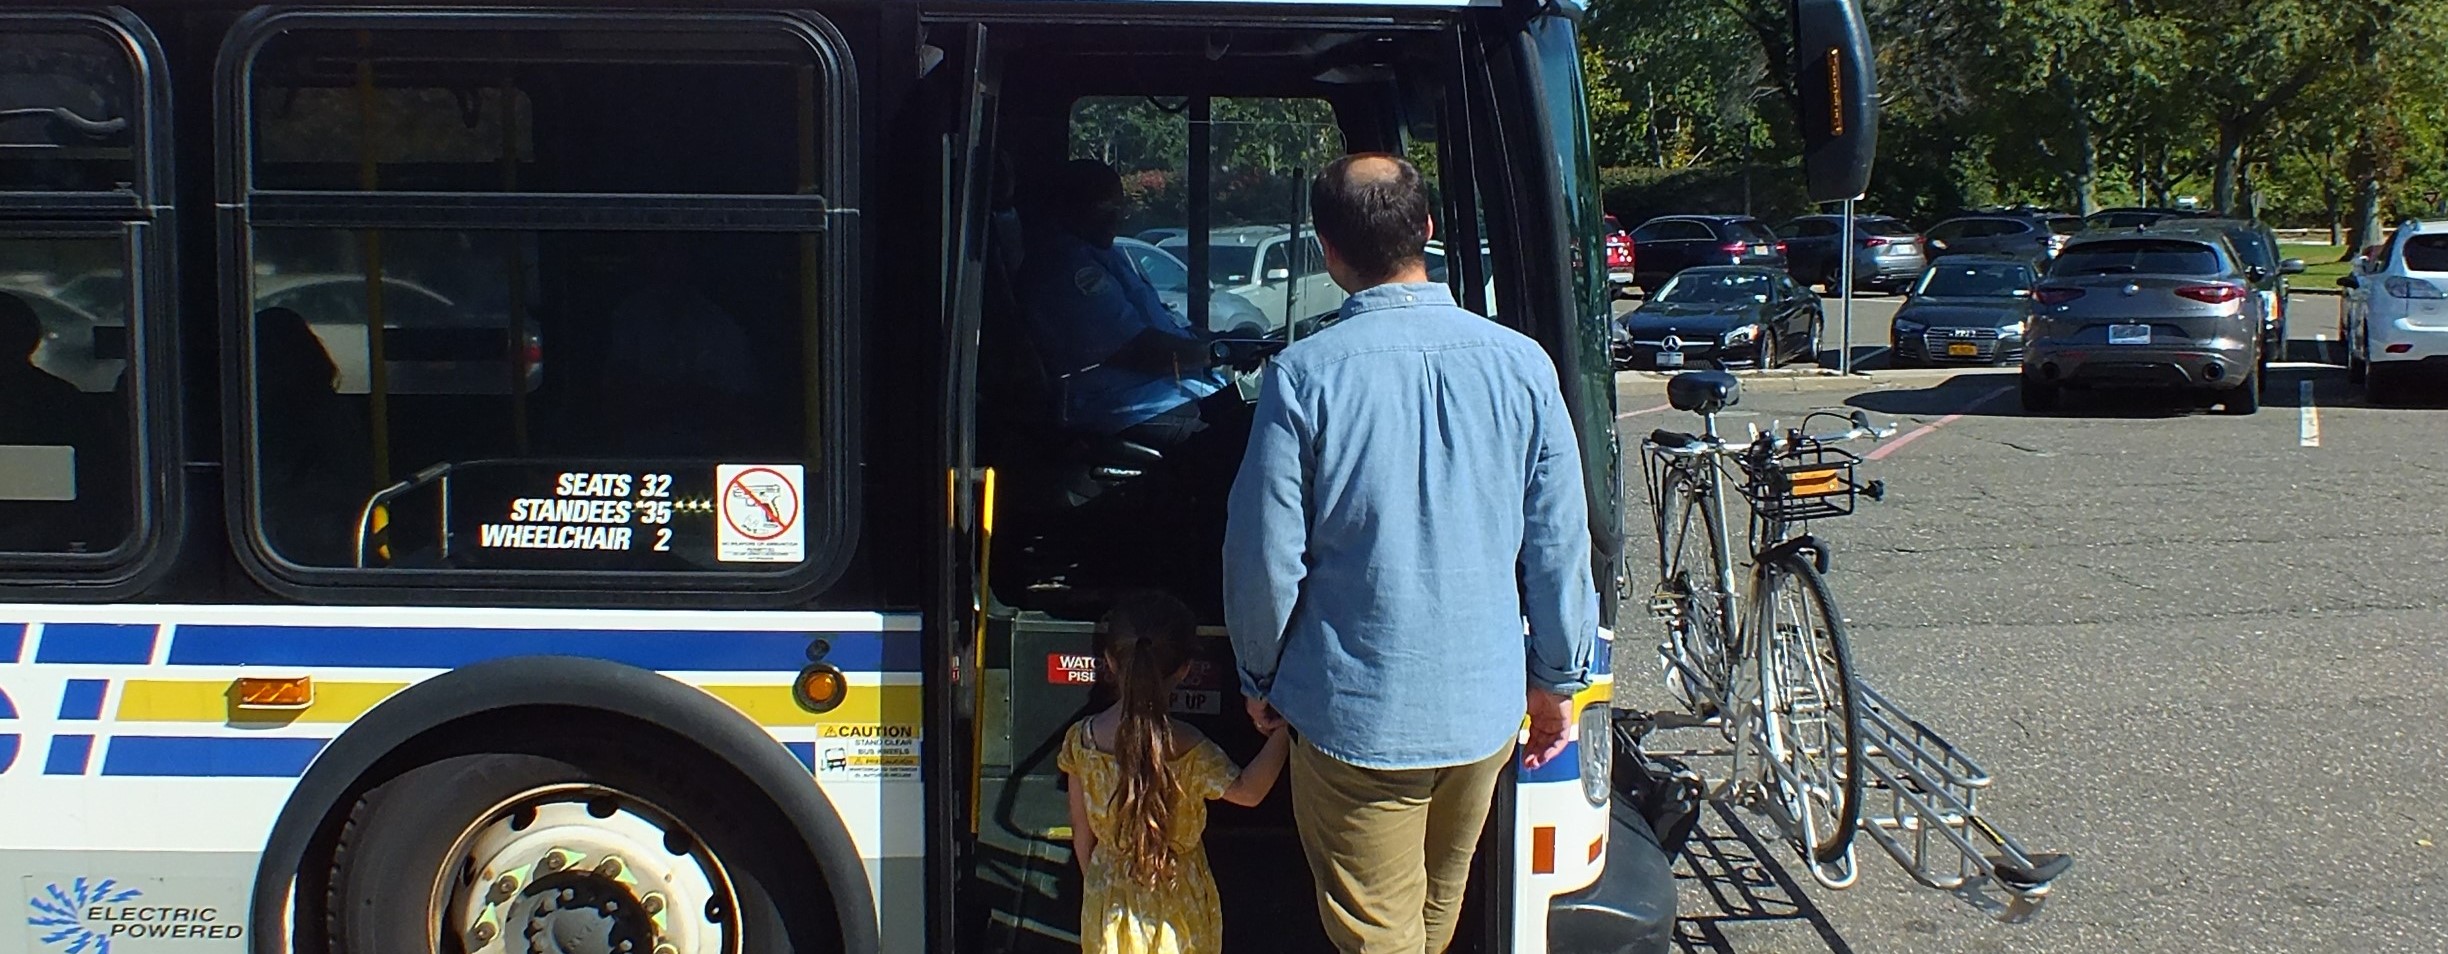 a man and his daughter getting onto a bus